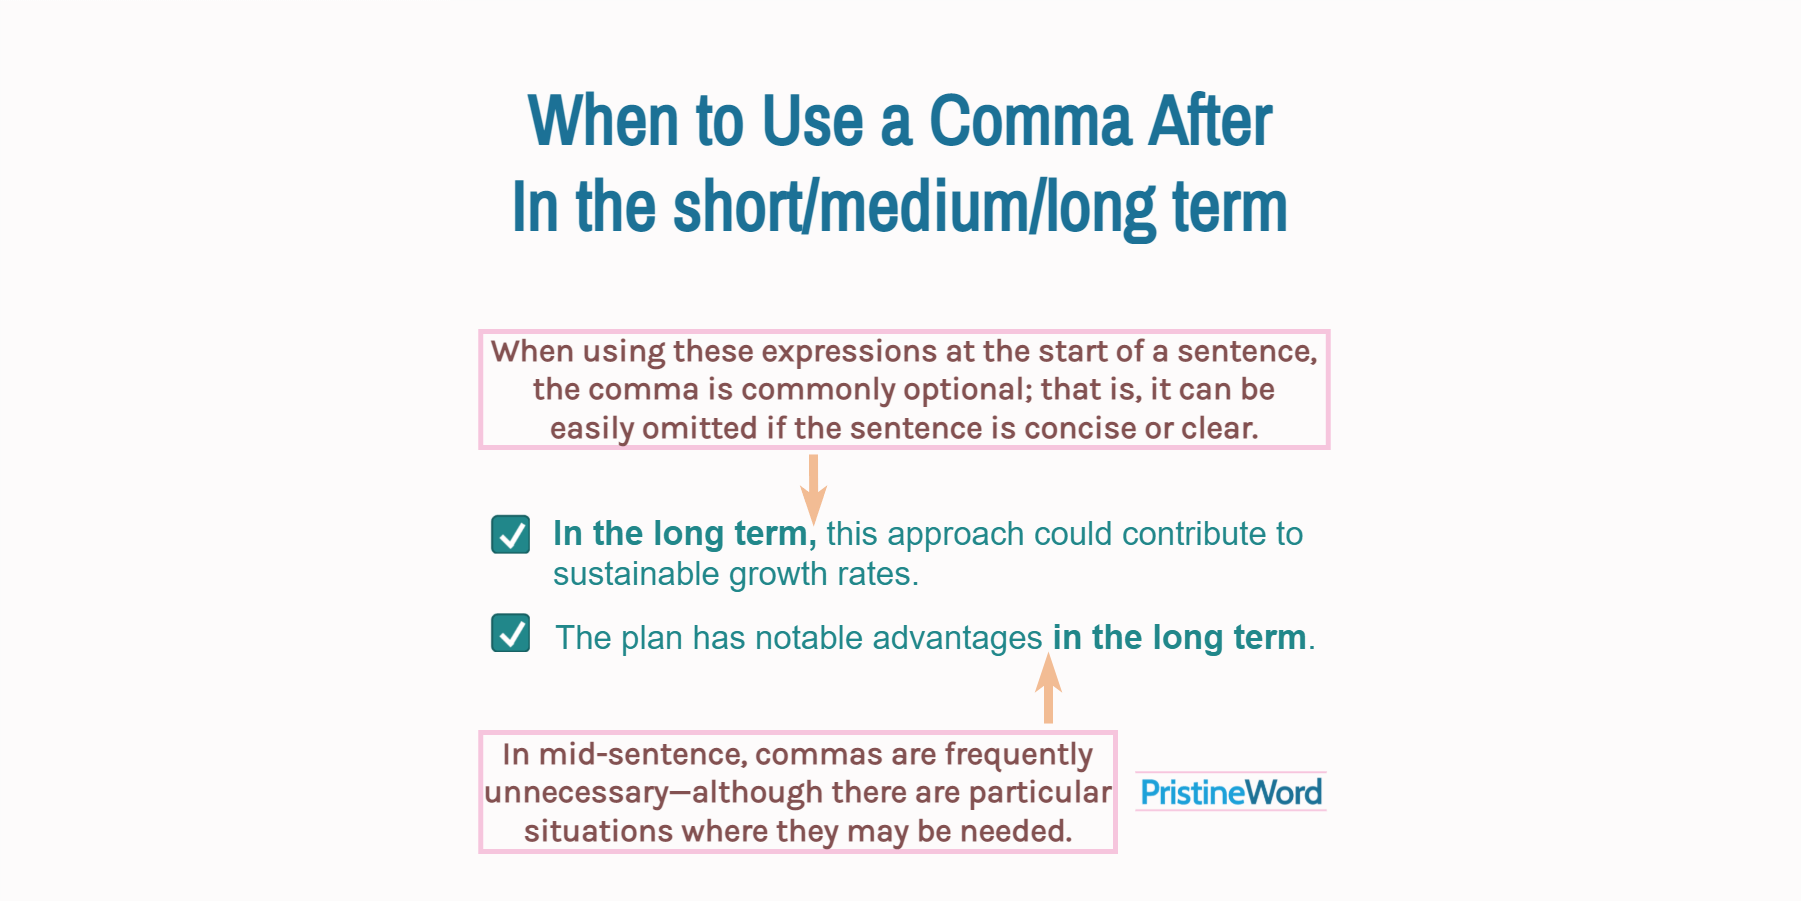 Comma After 'In the Short/Medium/Long Term'